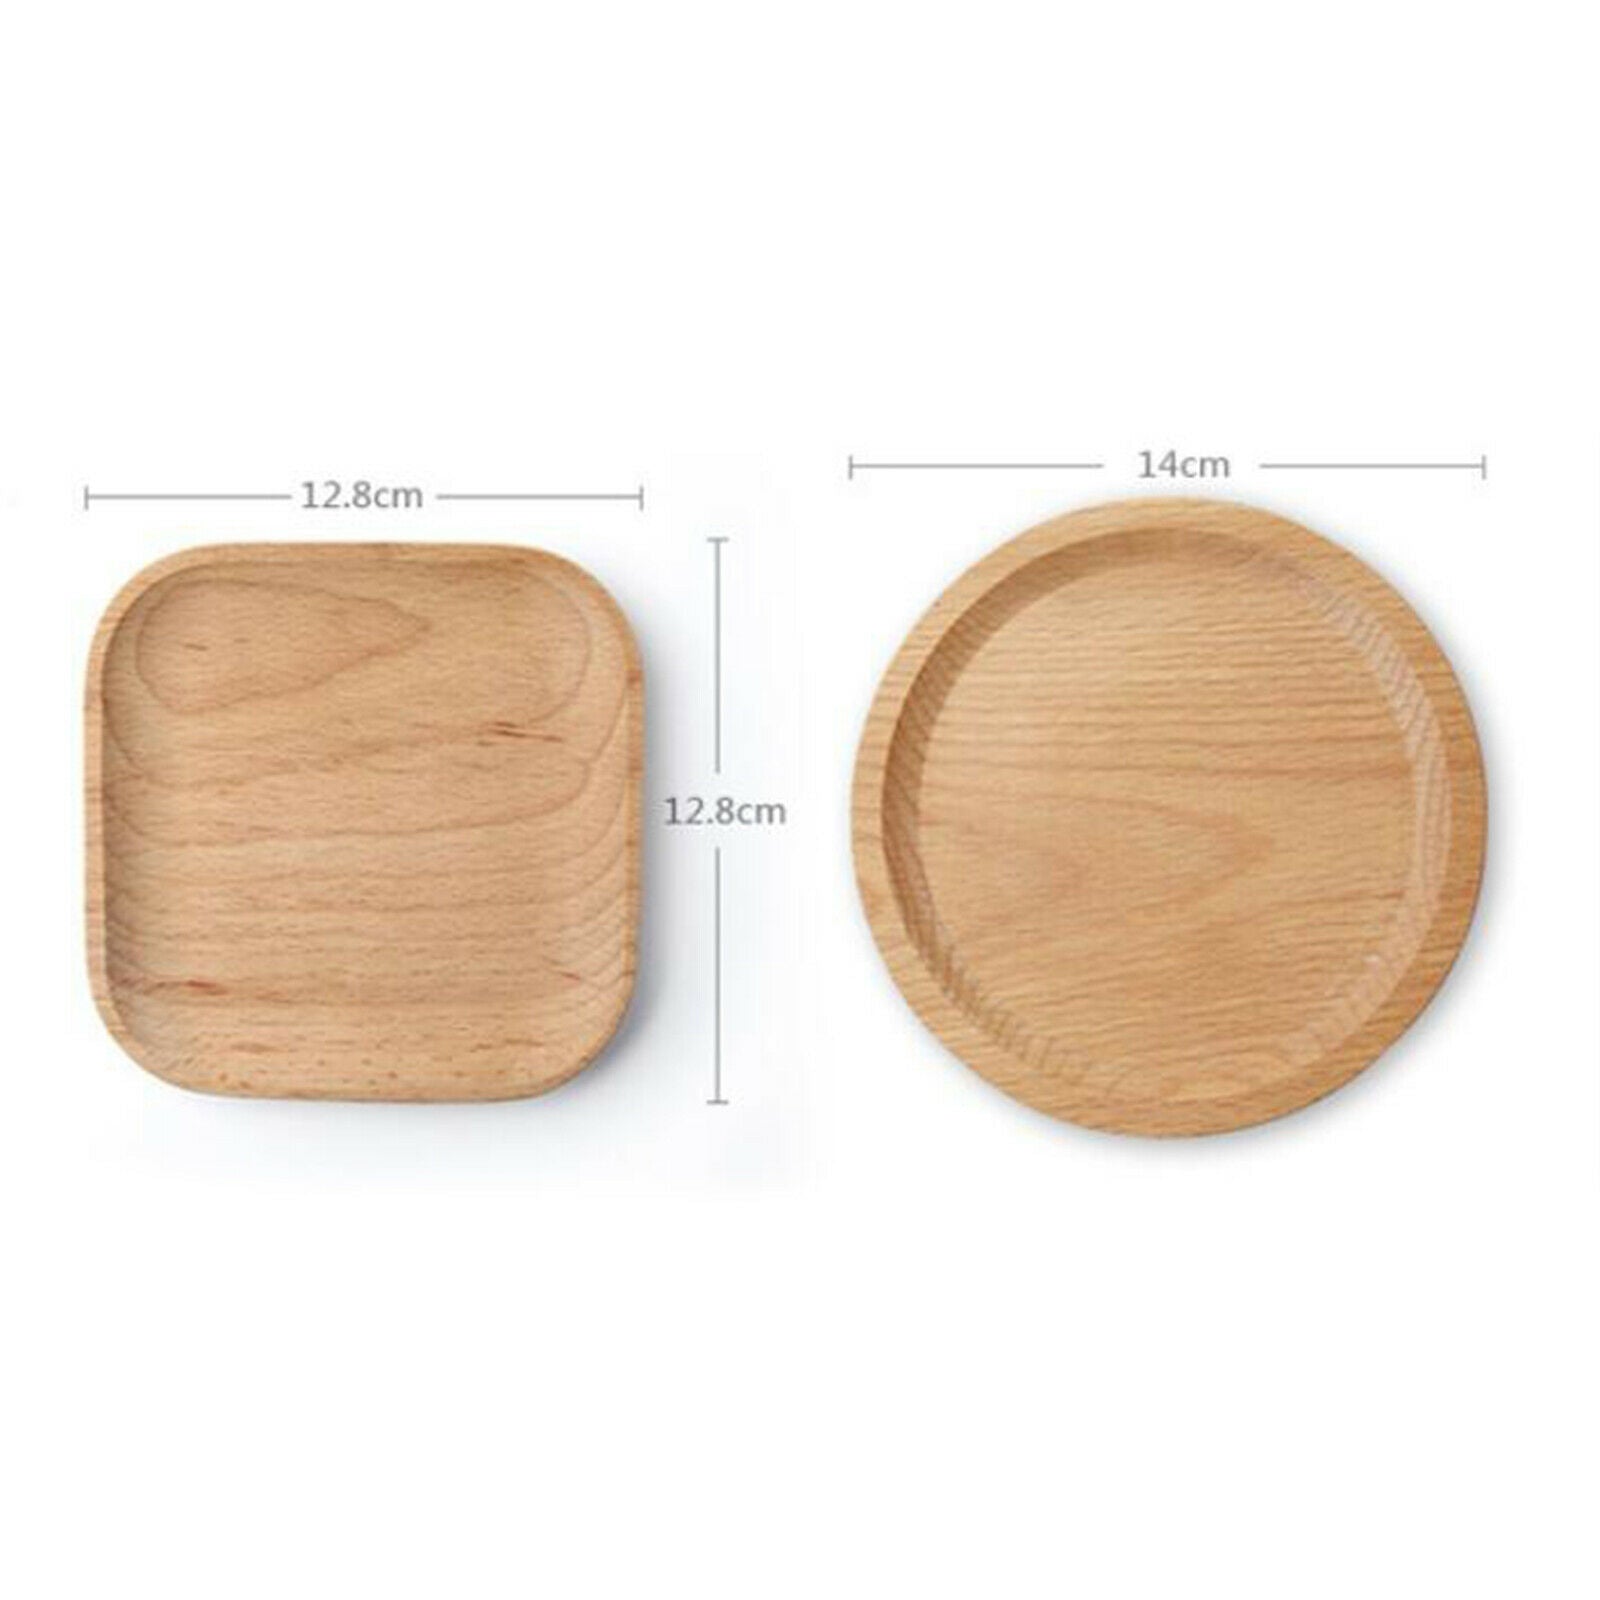 2Pieces Unbreakable Wood Dinner Plates Serving Dishes for Lunch Dessert